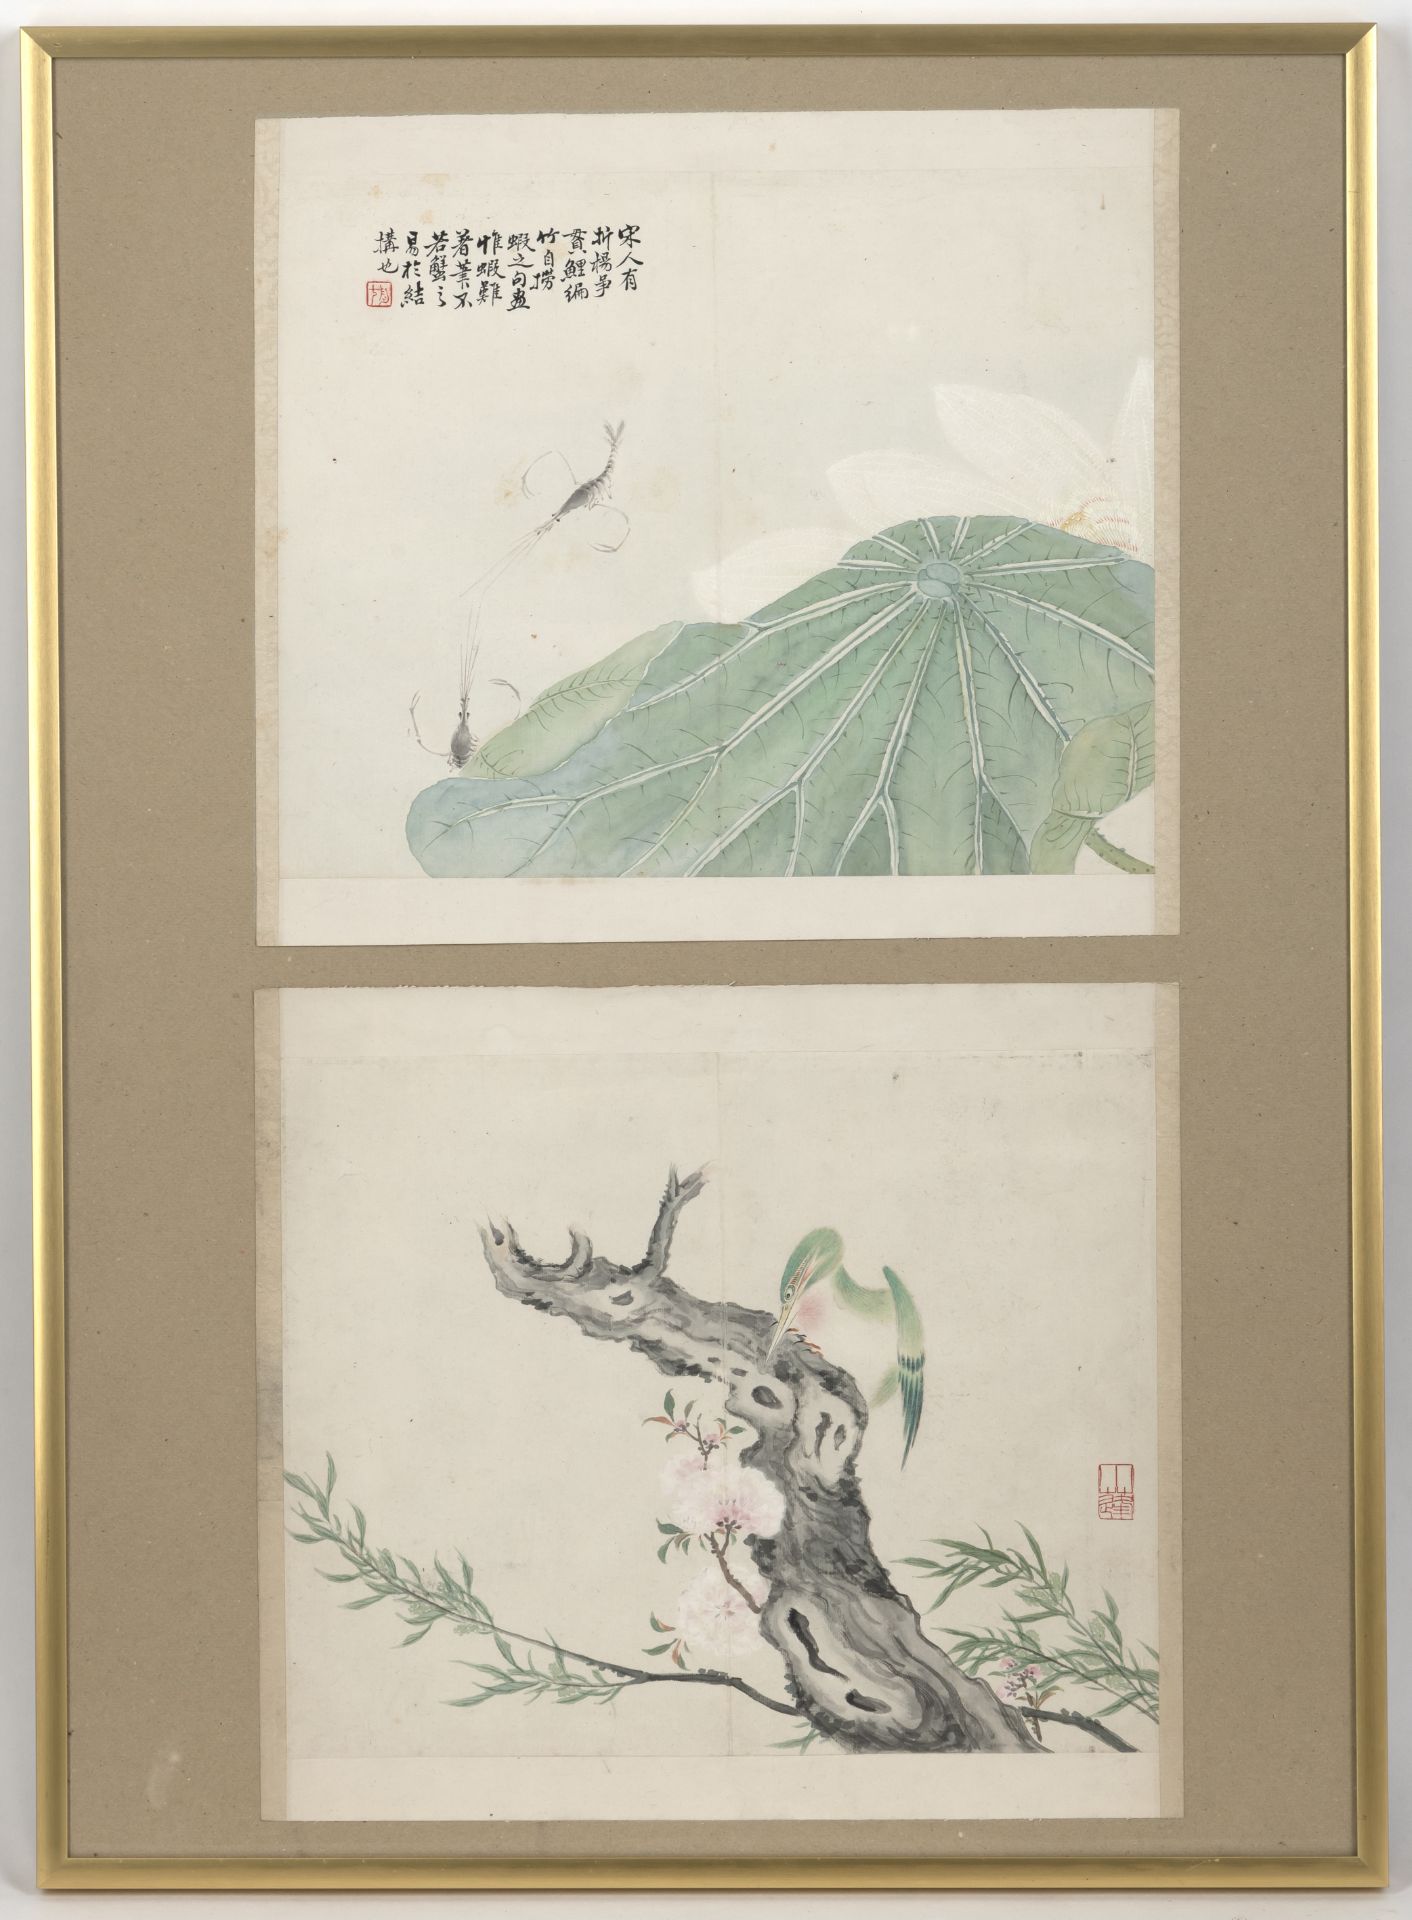 A PAIR OF ALBUM LEAVES DEPICTING LOTUS AND SHRIMP RESP. A BIRD ON A BLOSSOMING PEACH TREE - Image 4 of 4